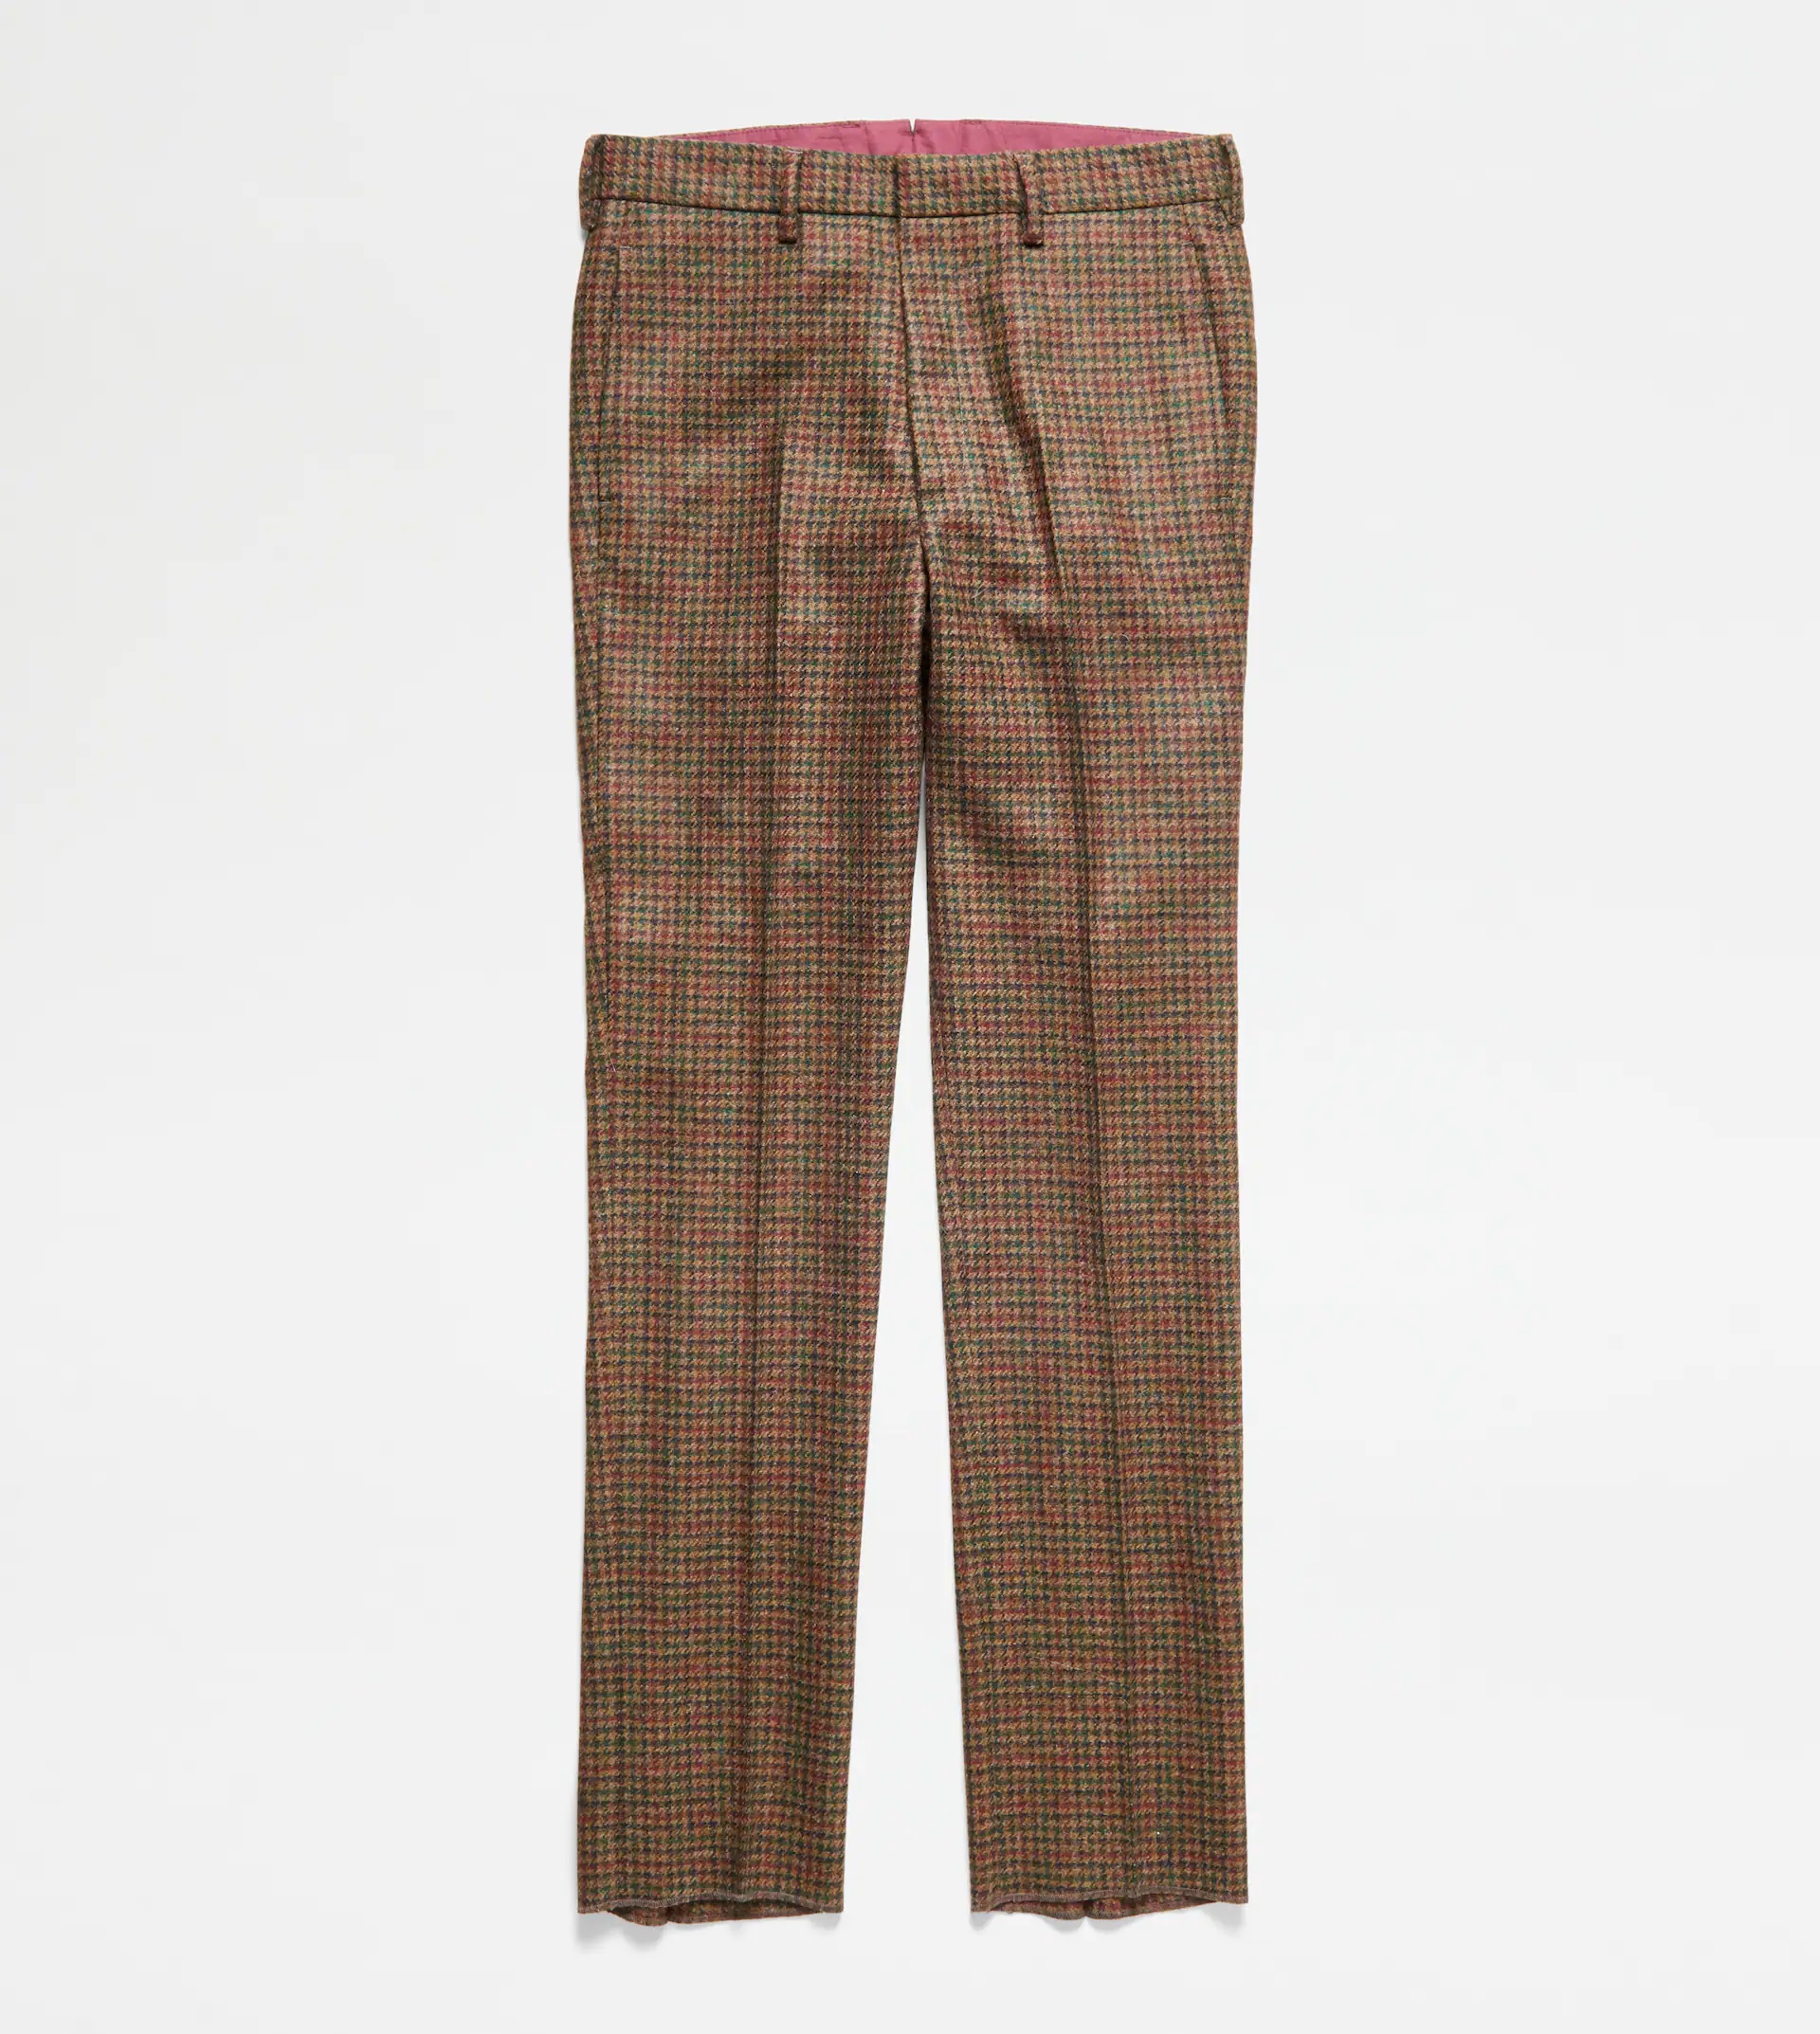 CLASSIC SHETLAND TROUSERS - BROWN, RED - 1